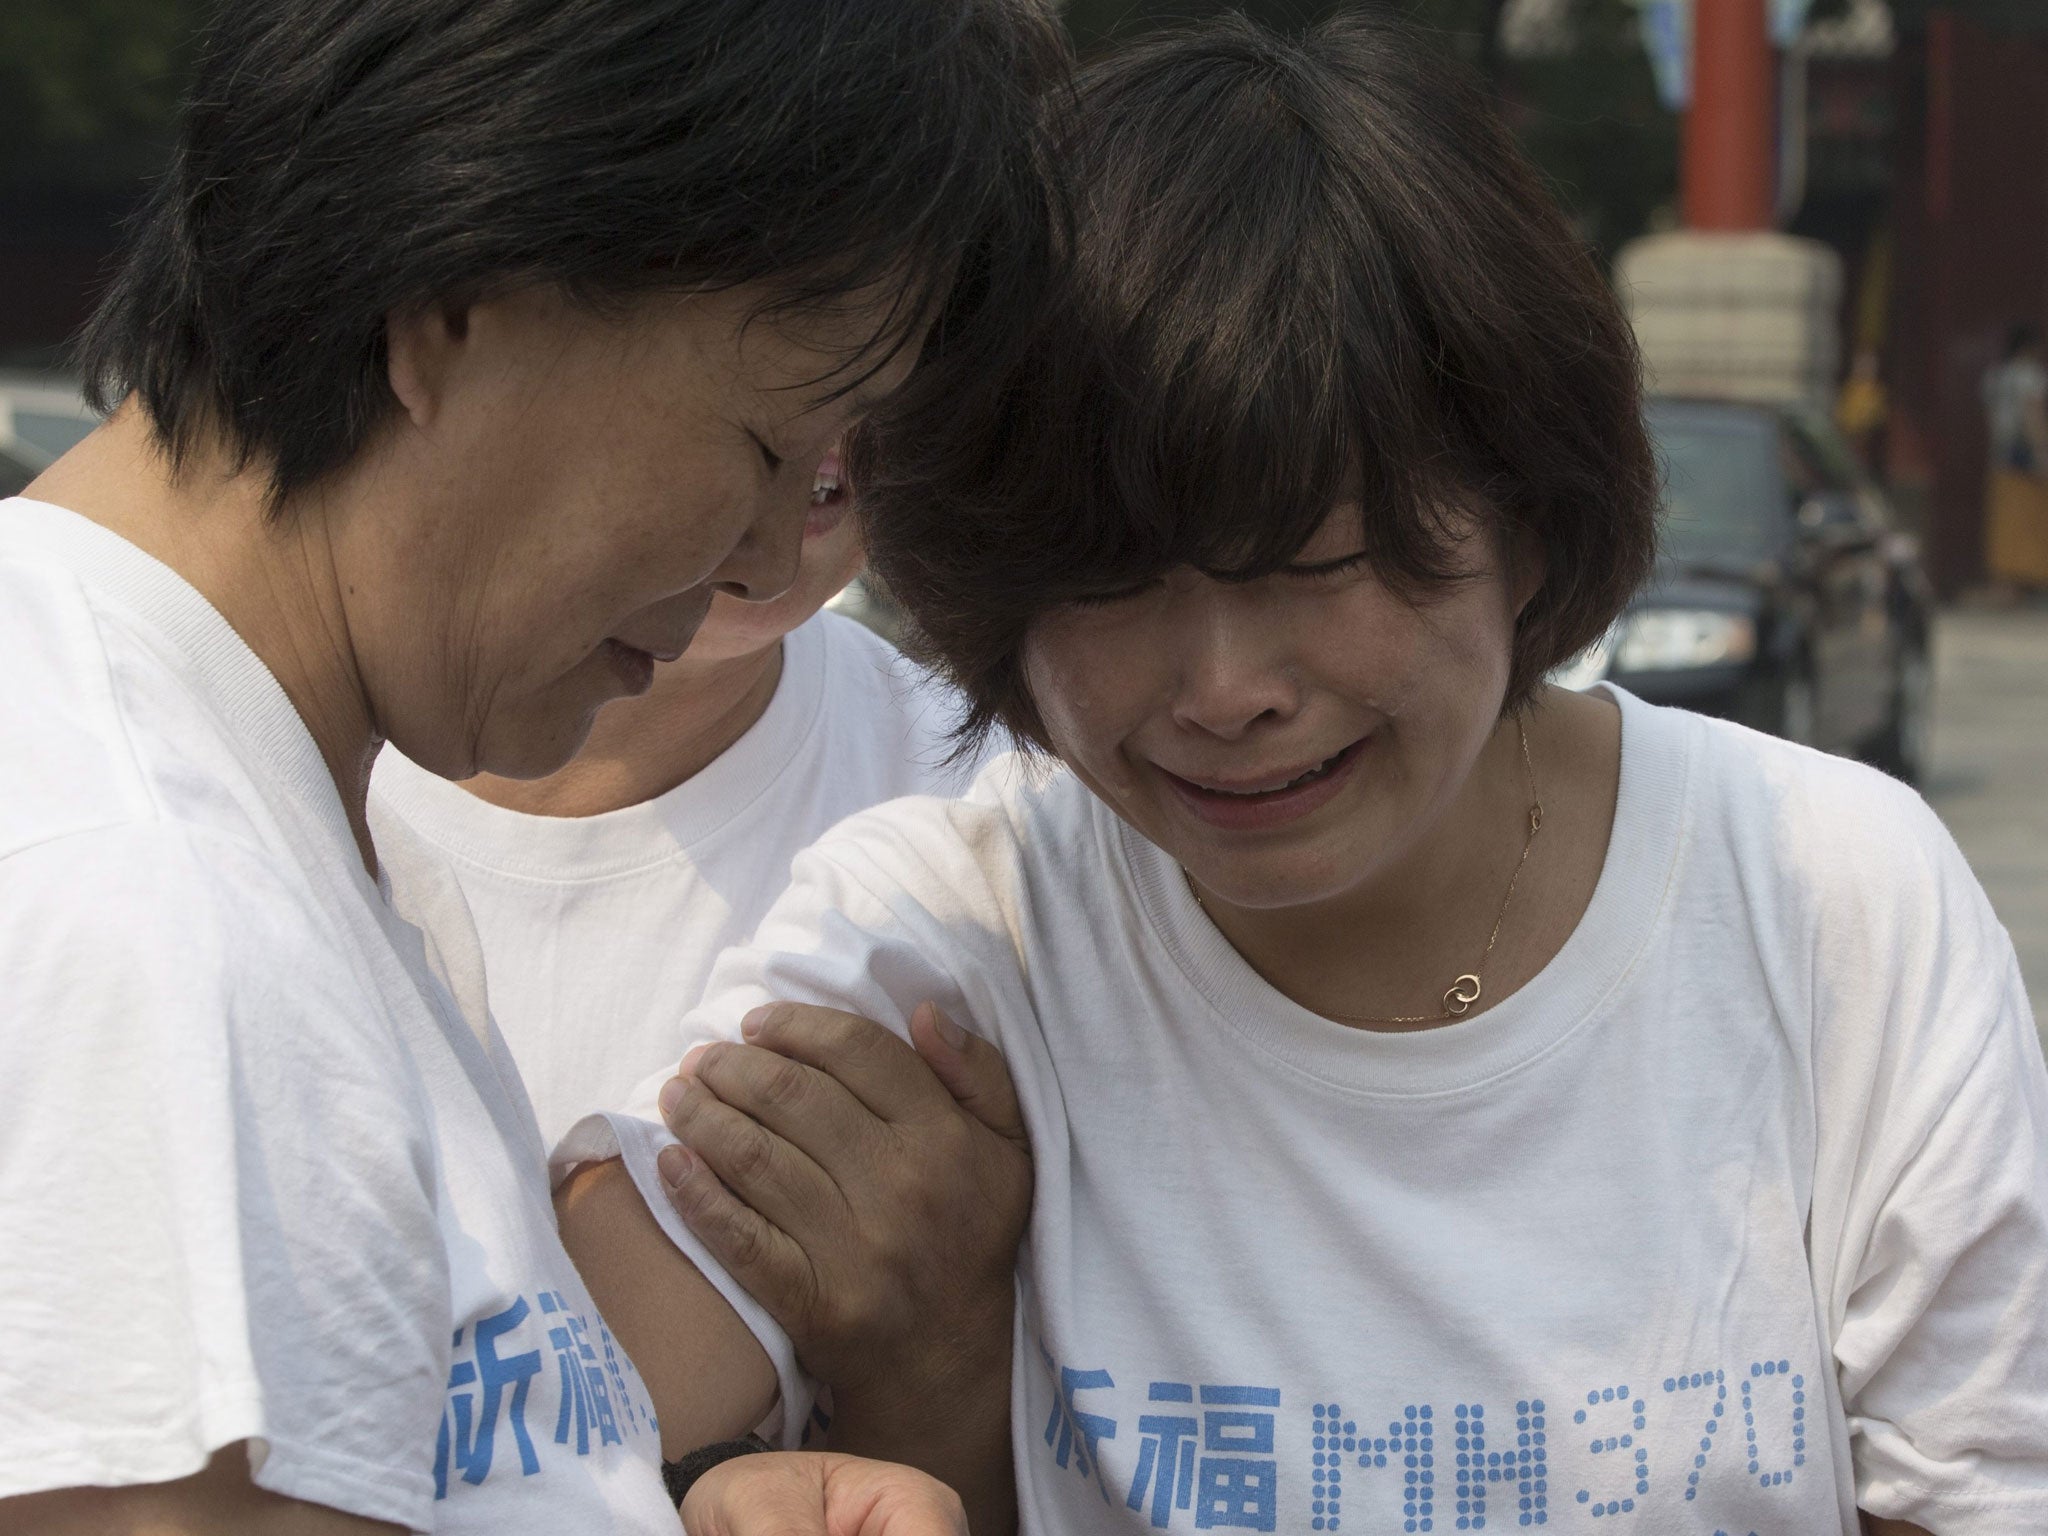 Chinese relatives of passengers of Malaysia Airlines flight MH370 console each other before entering the Lama Temple to pray in Beijing, China, 15 June 2014